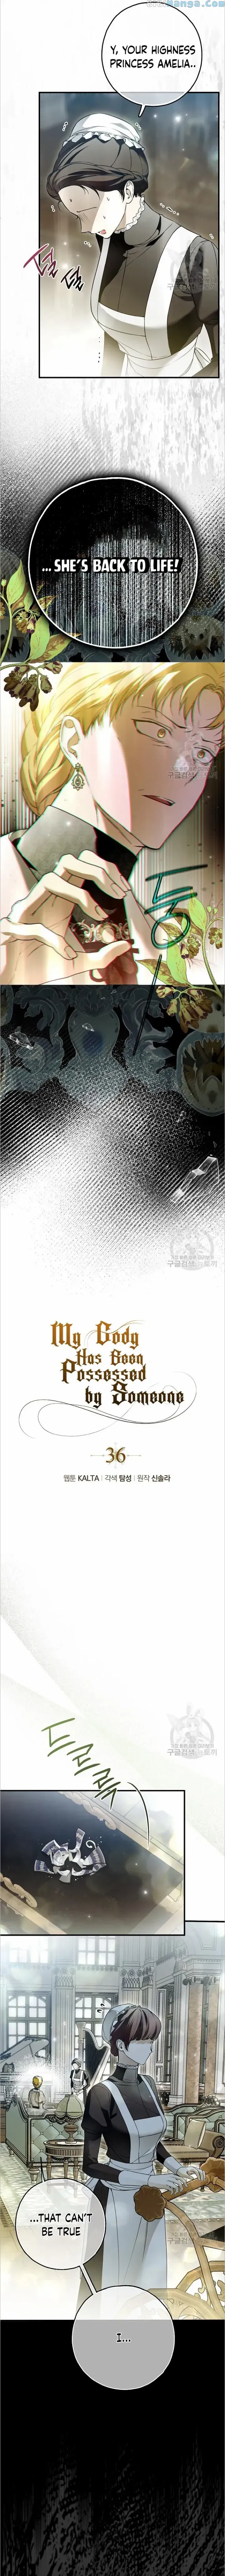 My Body Has Been Possessed By Someone - Page 2